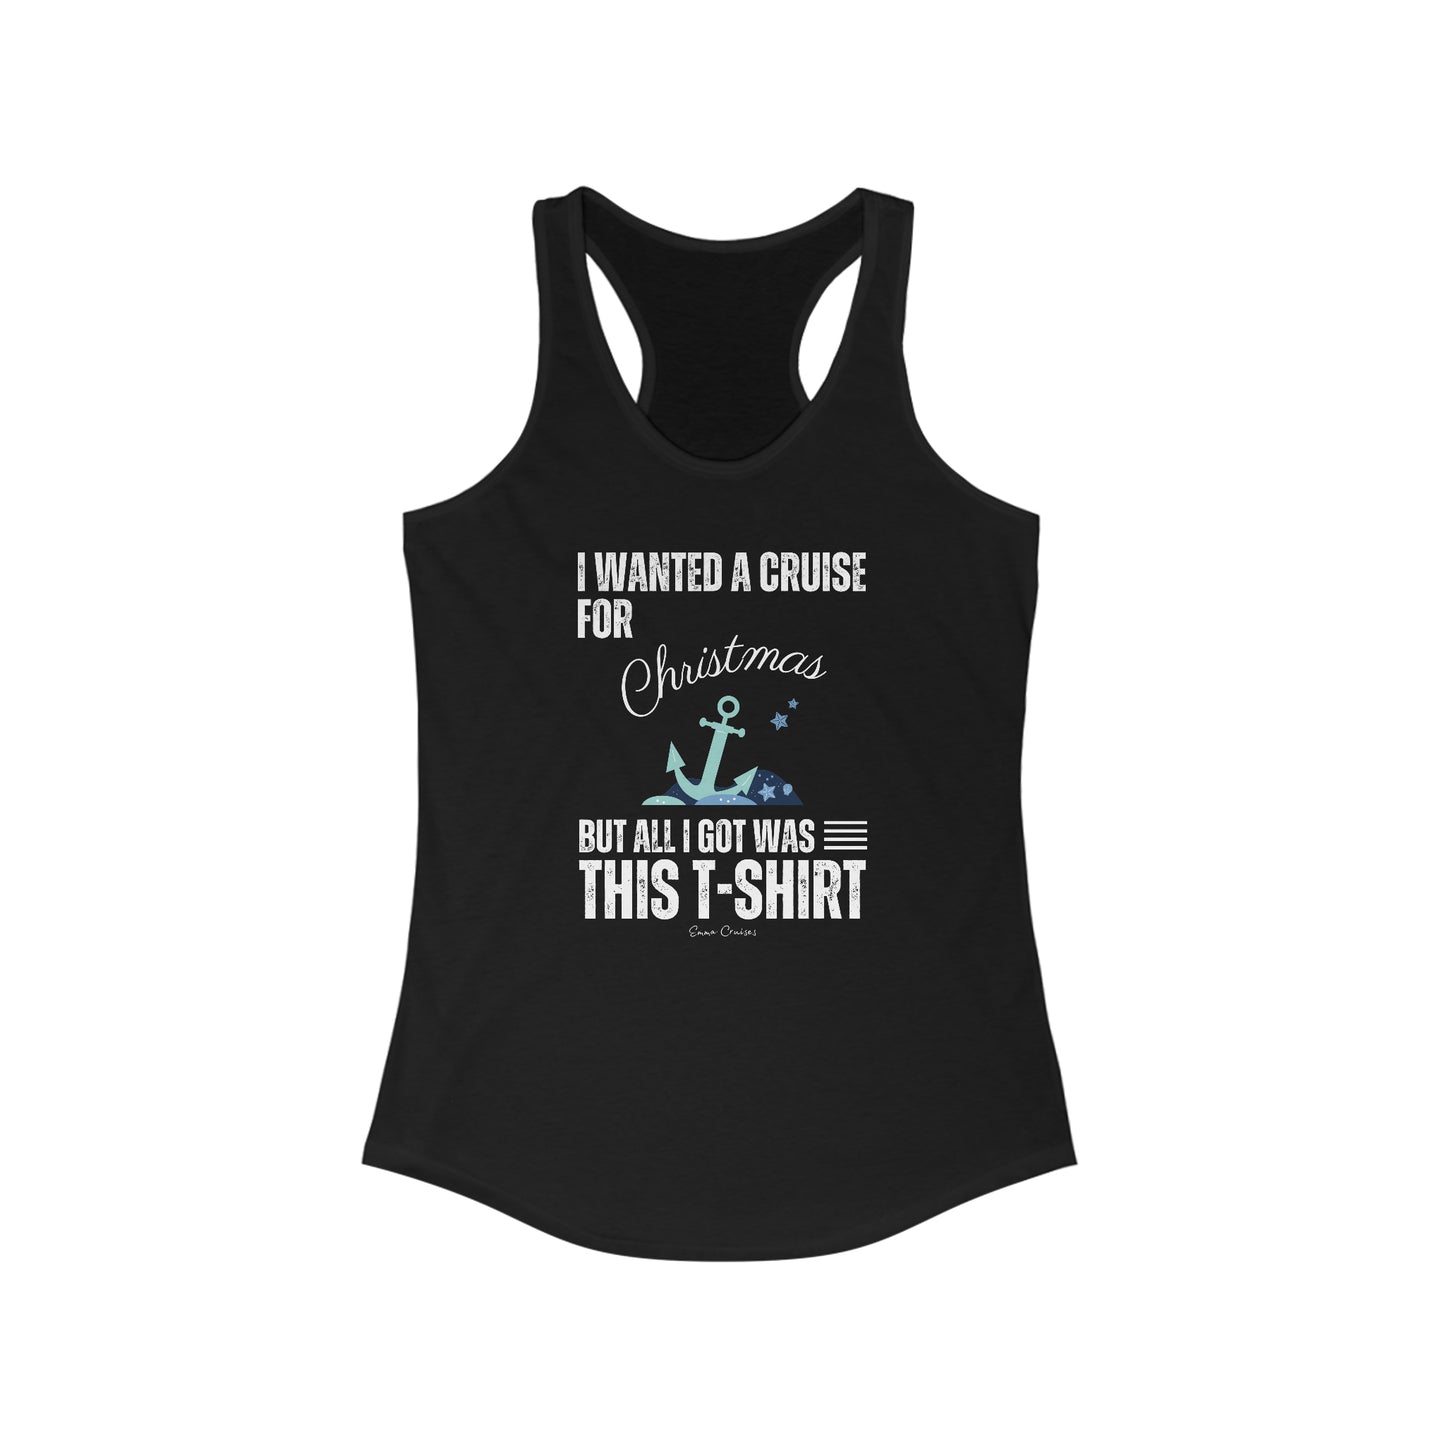 I Wanted a Cruise for Christmas - Tank Top